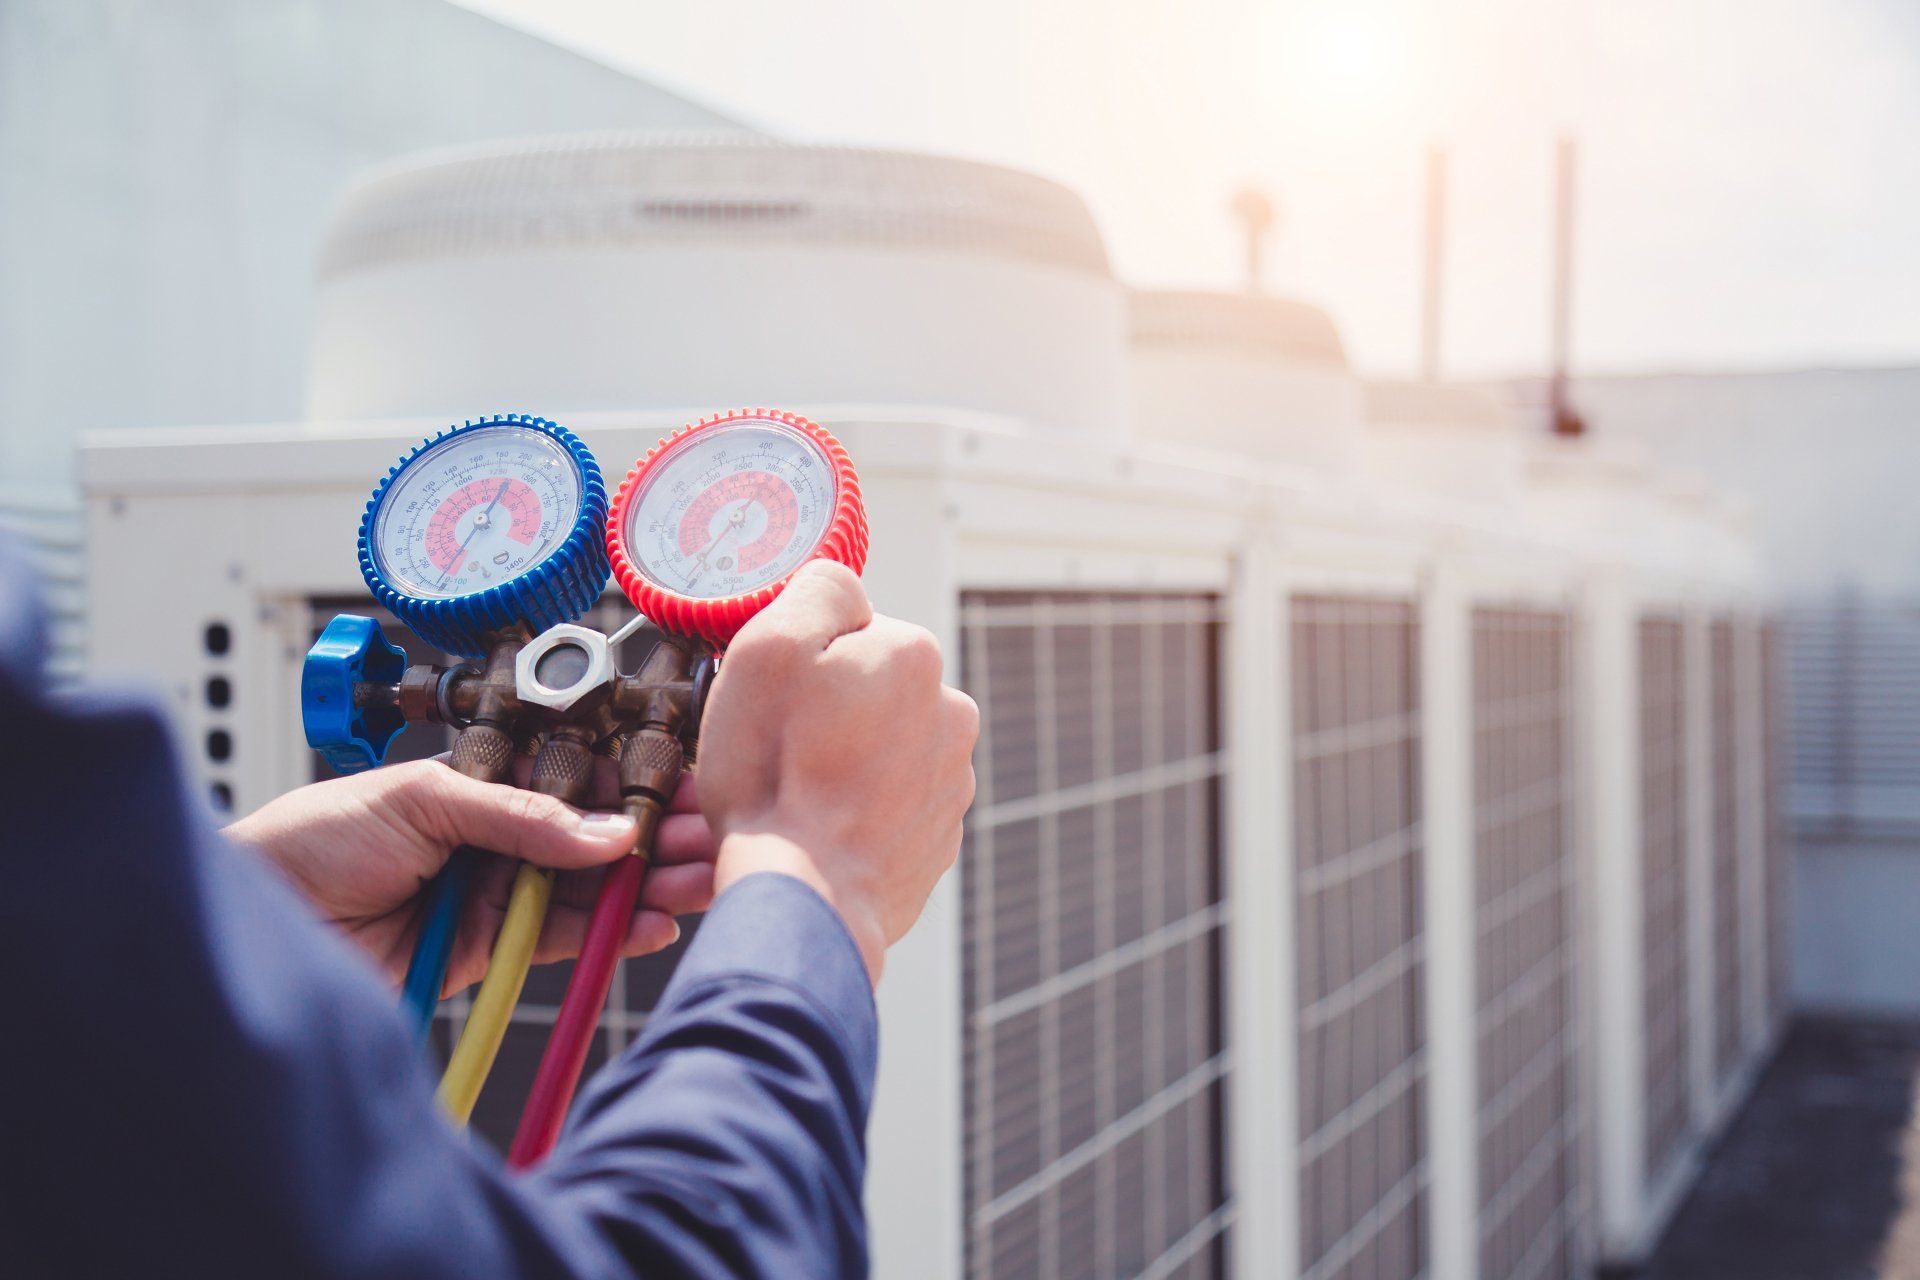 Technician Is Checking Air Conditioner - Air Conditioning Services in Mackay, QLD